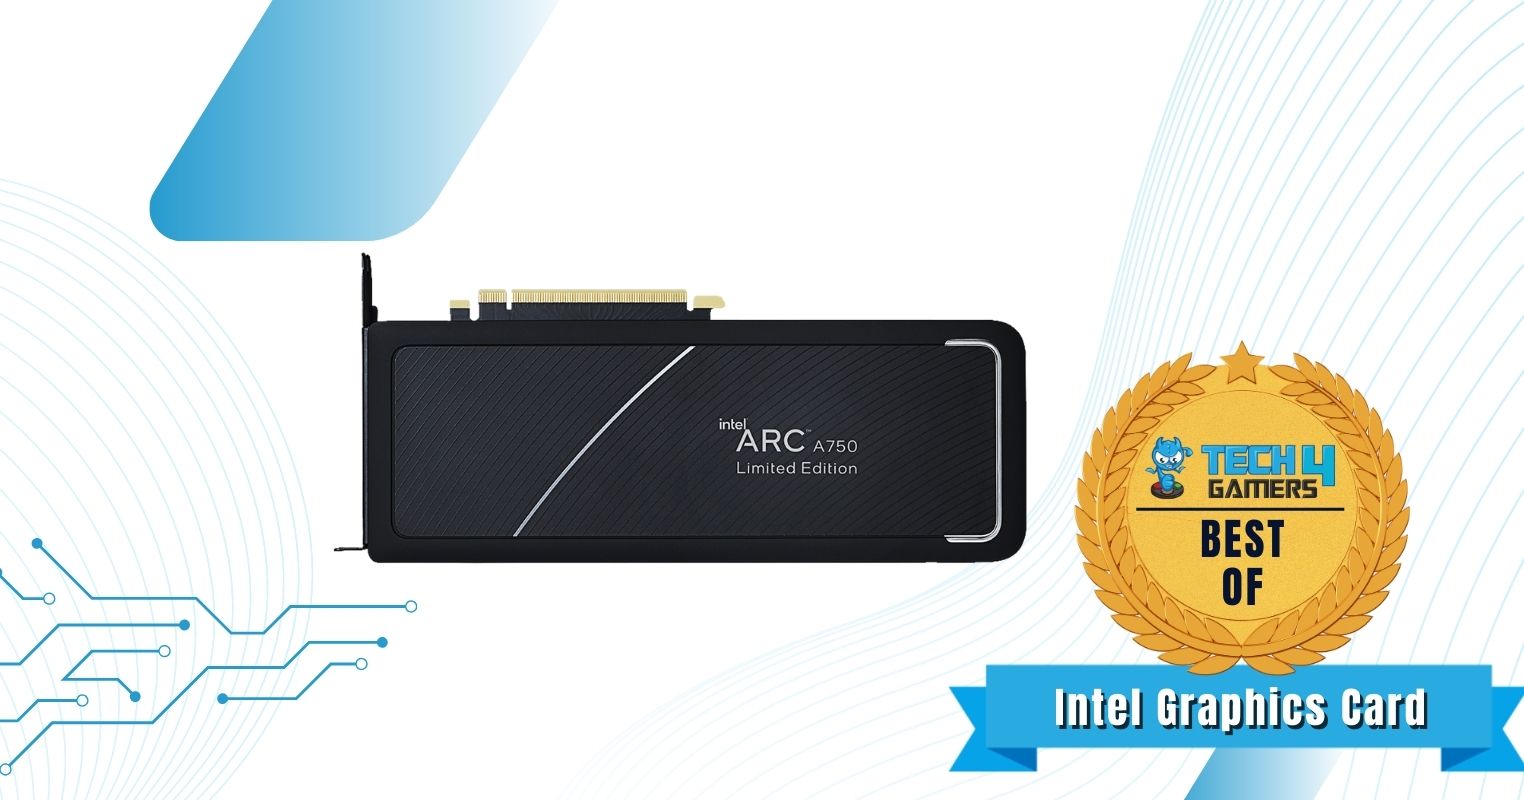 Best Intel Graphics Card Under $300 - Intel Arc A750 Limited Edition